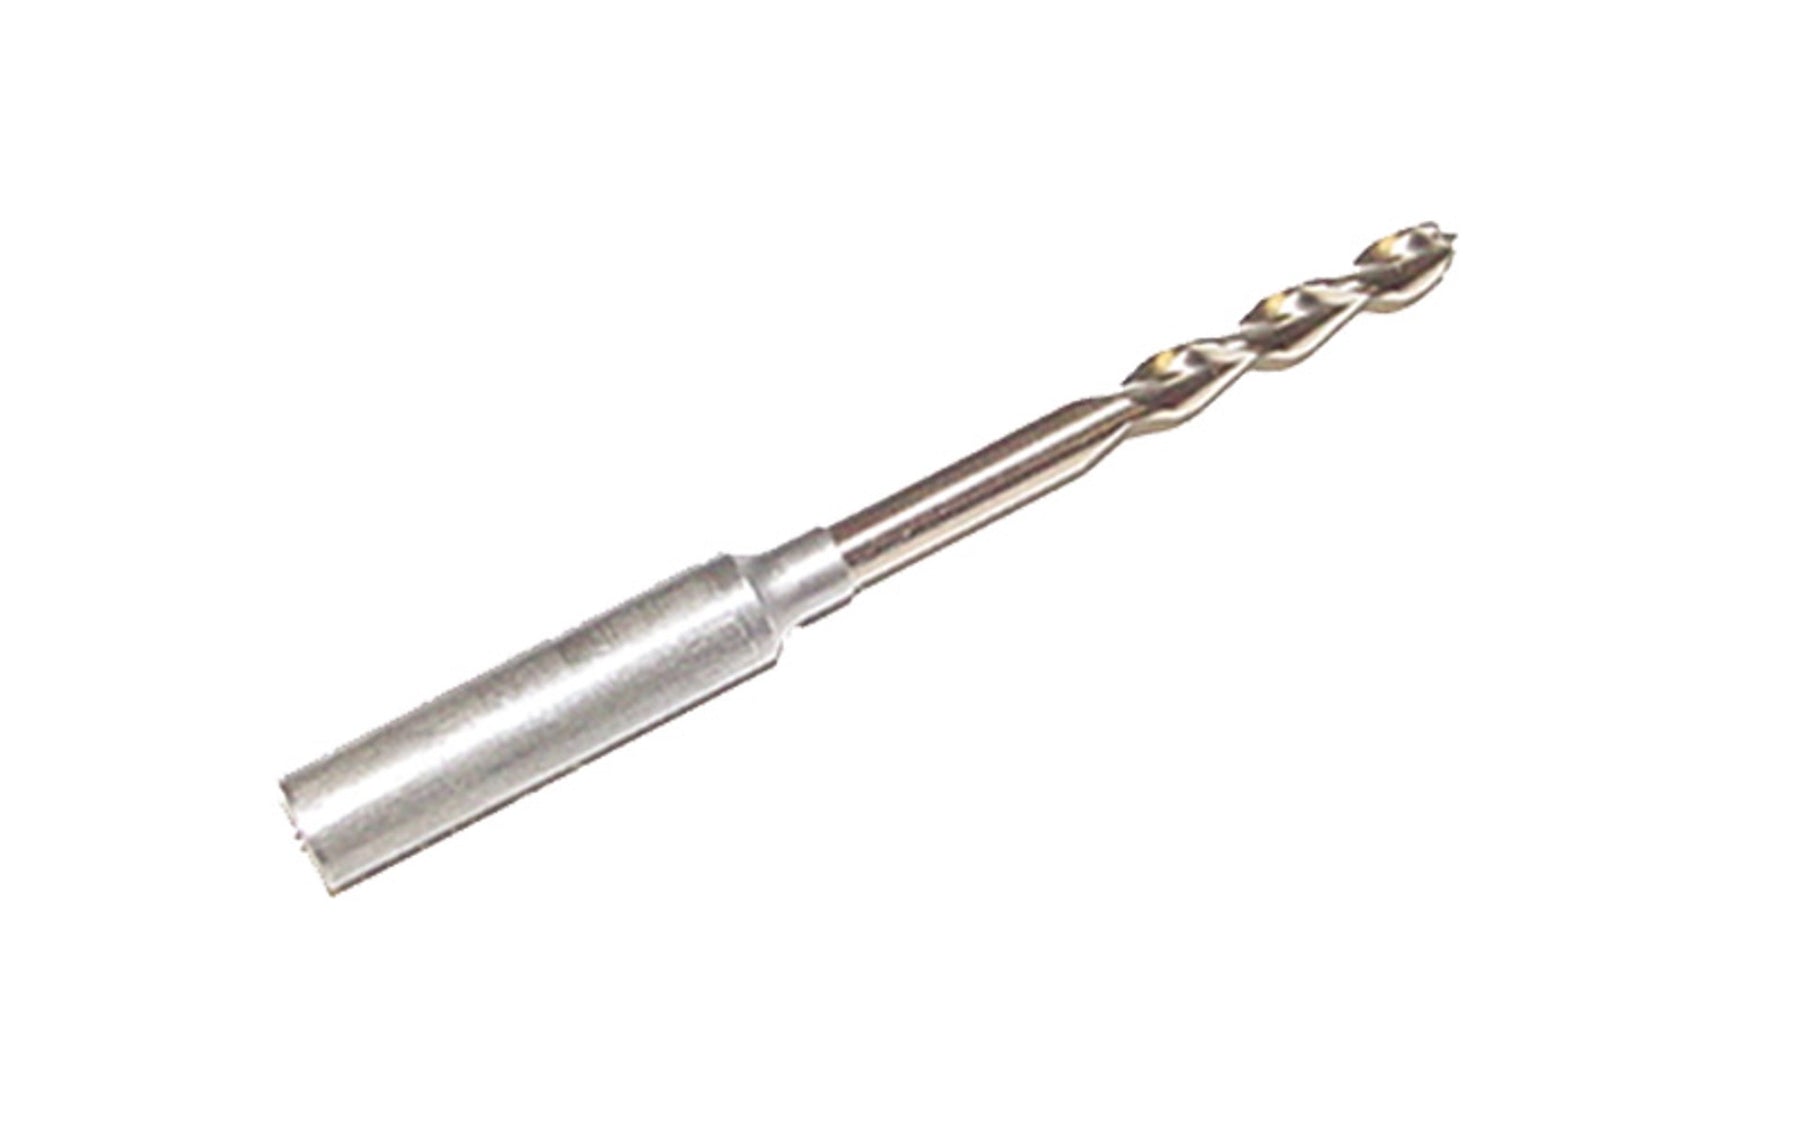 B00964 - 9/64" Drill Bit Brad And Spur Point With 1/4" Shank